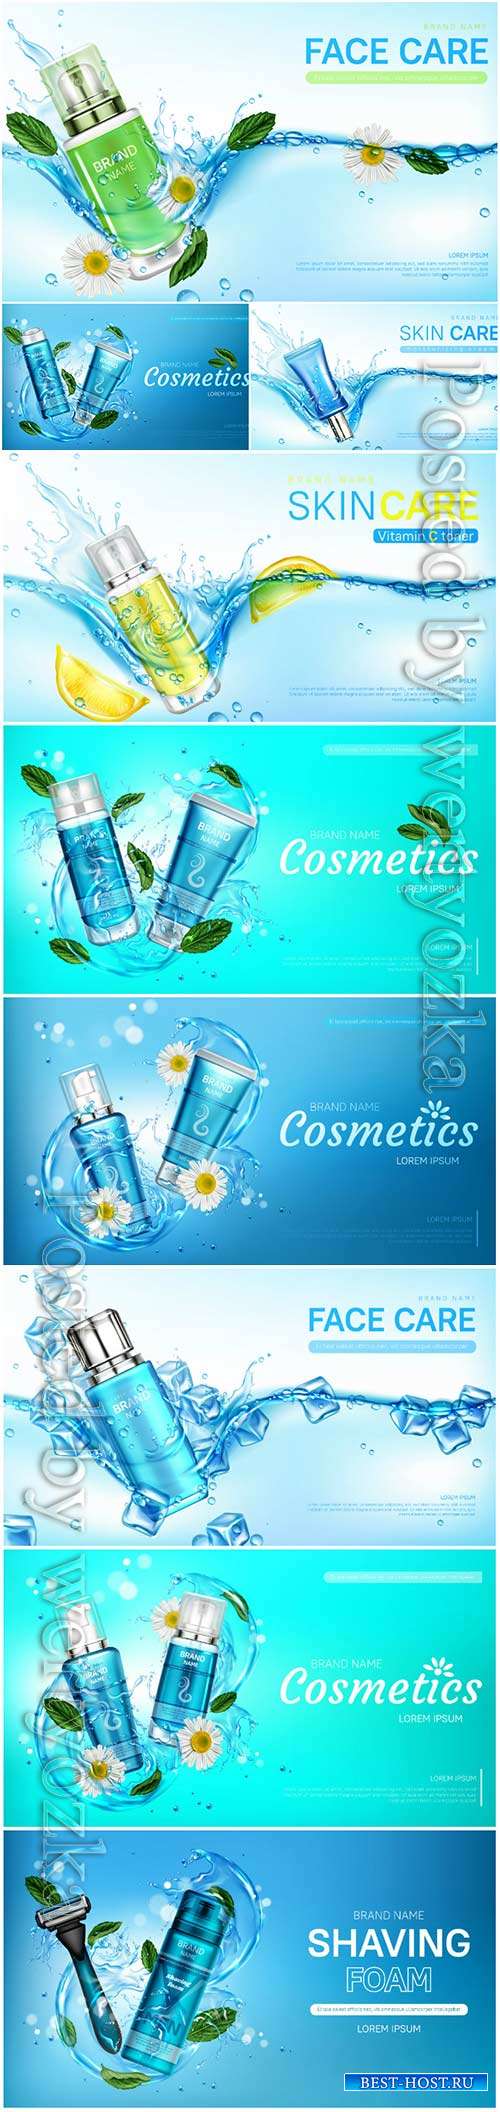 Skin care cosmetics, advertising posters in vector